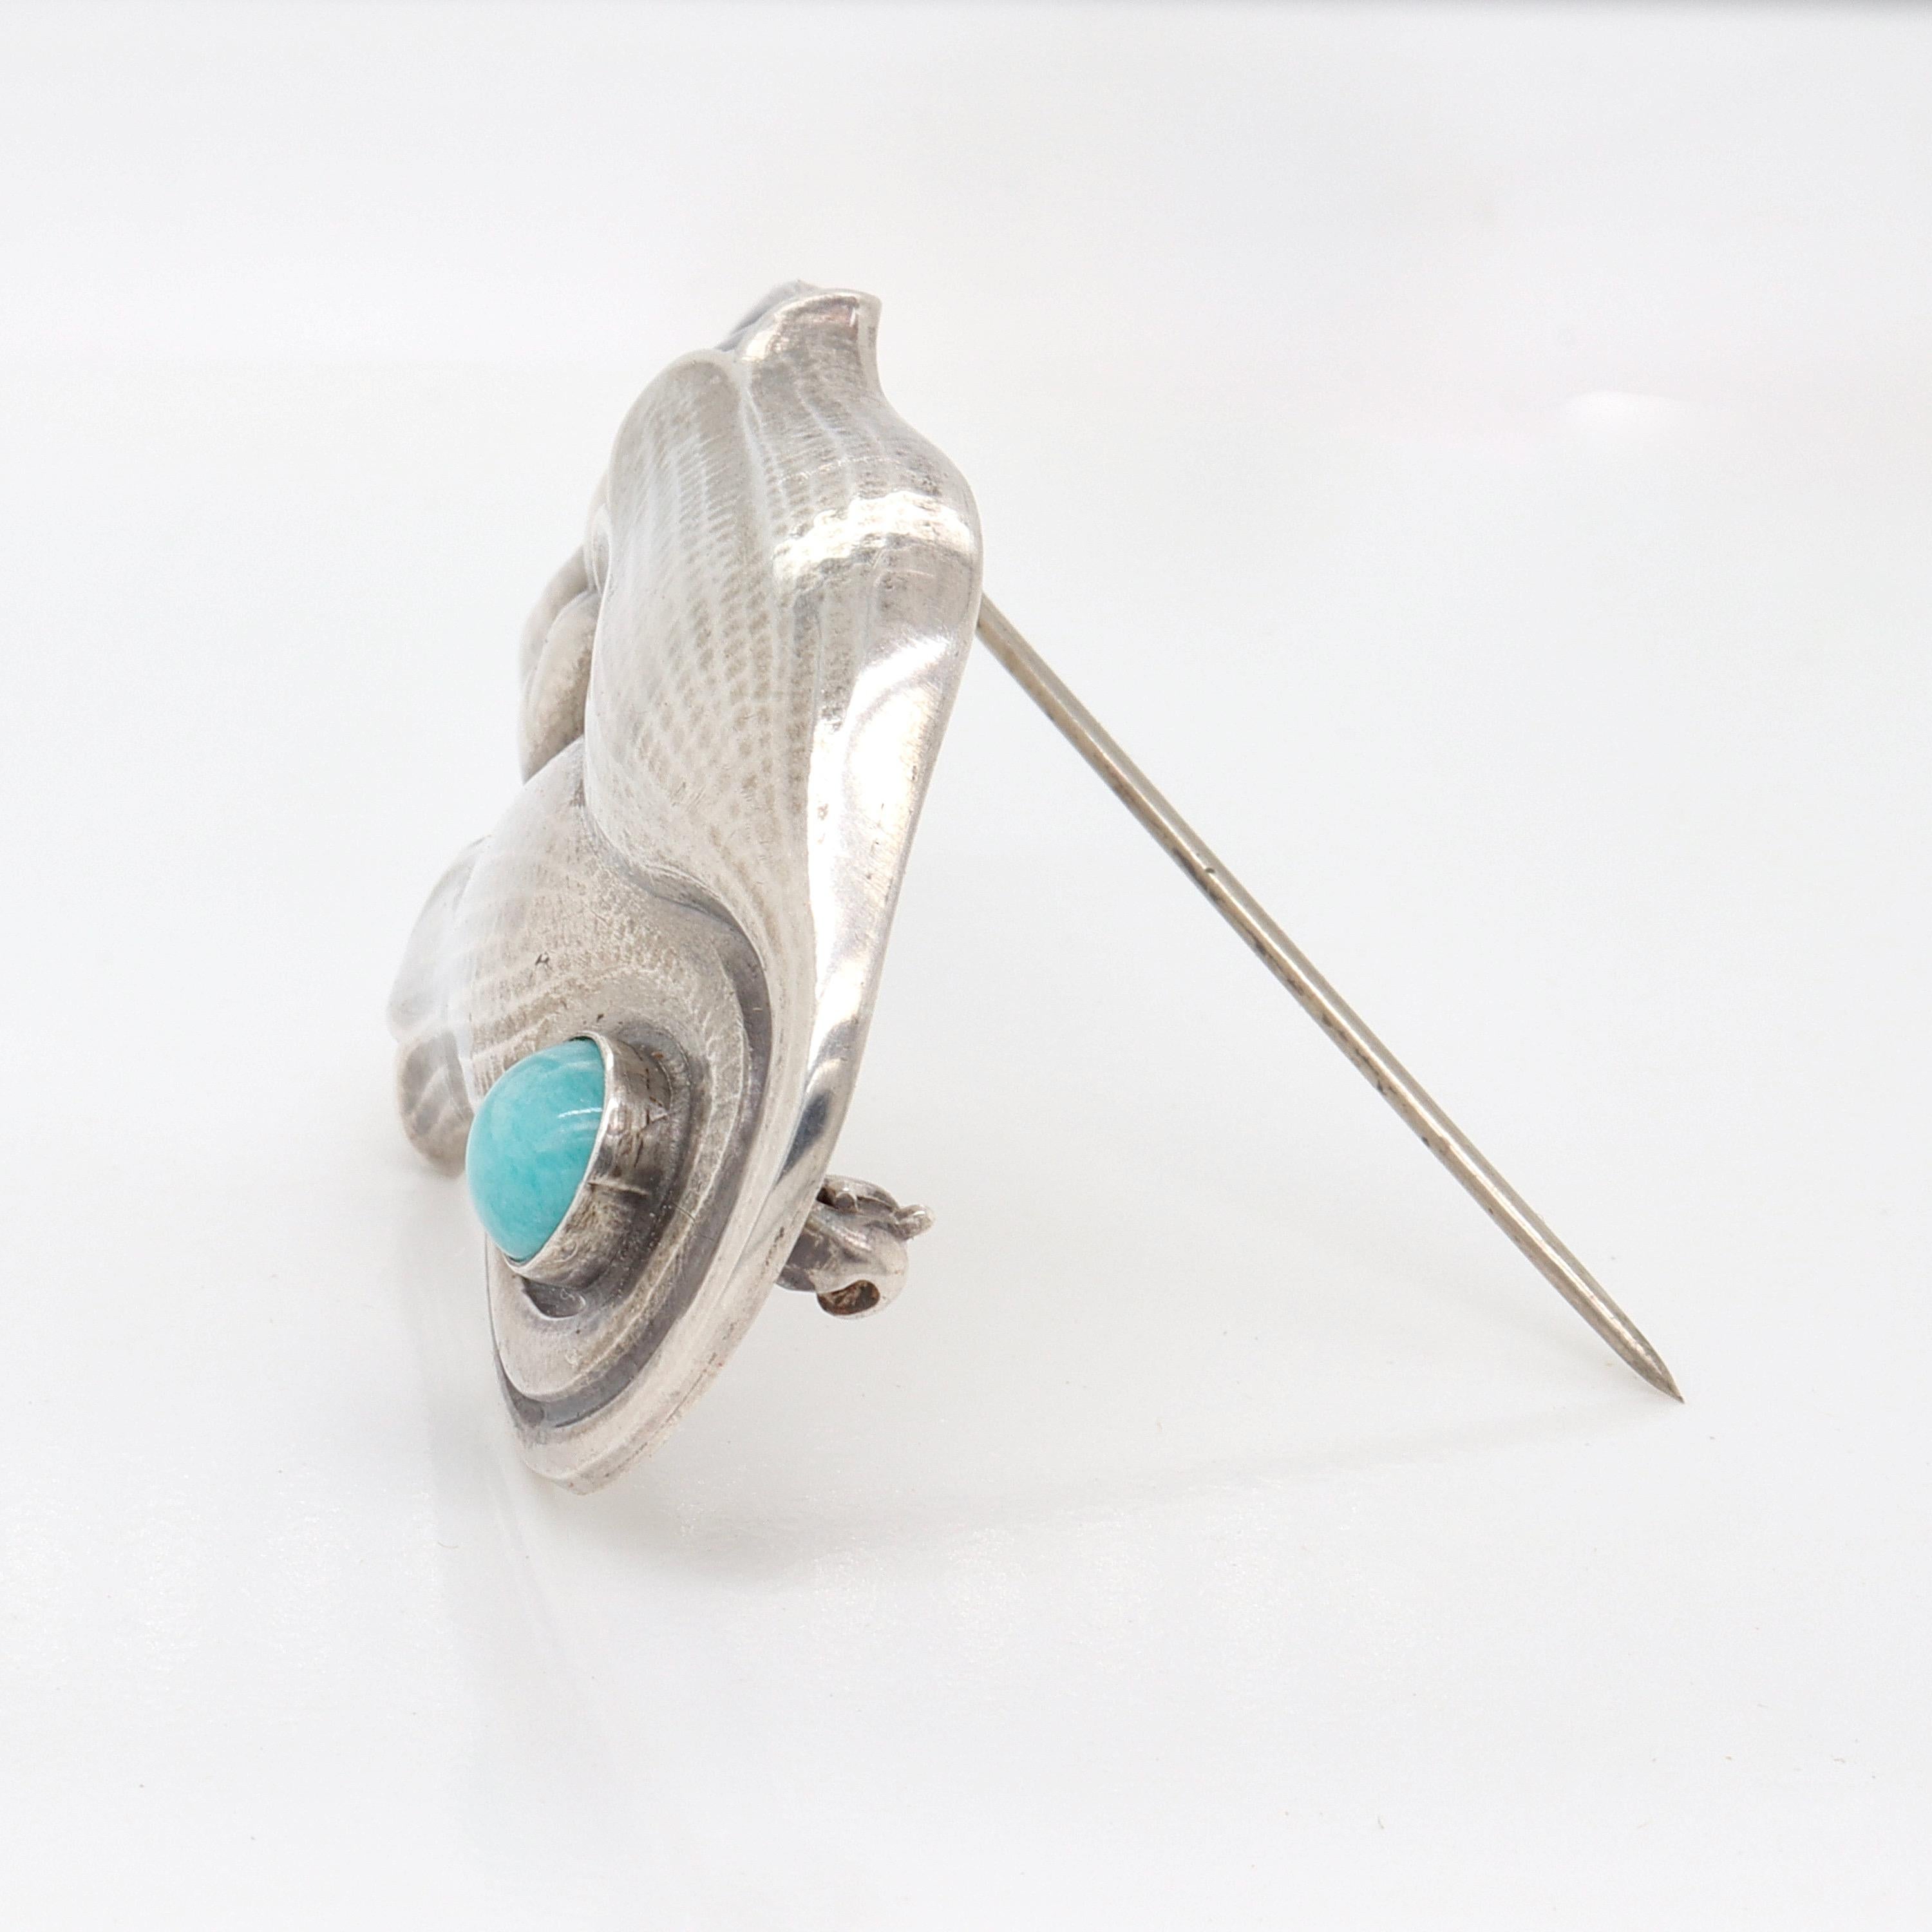 Georg Jensen Sterling Silver Tulip Brooch No.100b with Amazonite Cabochon In Good Condition For Sale In Philadelphia, PA